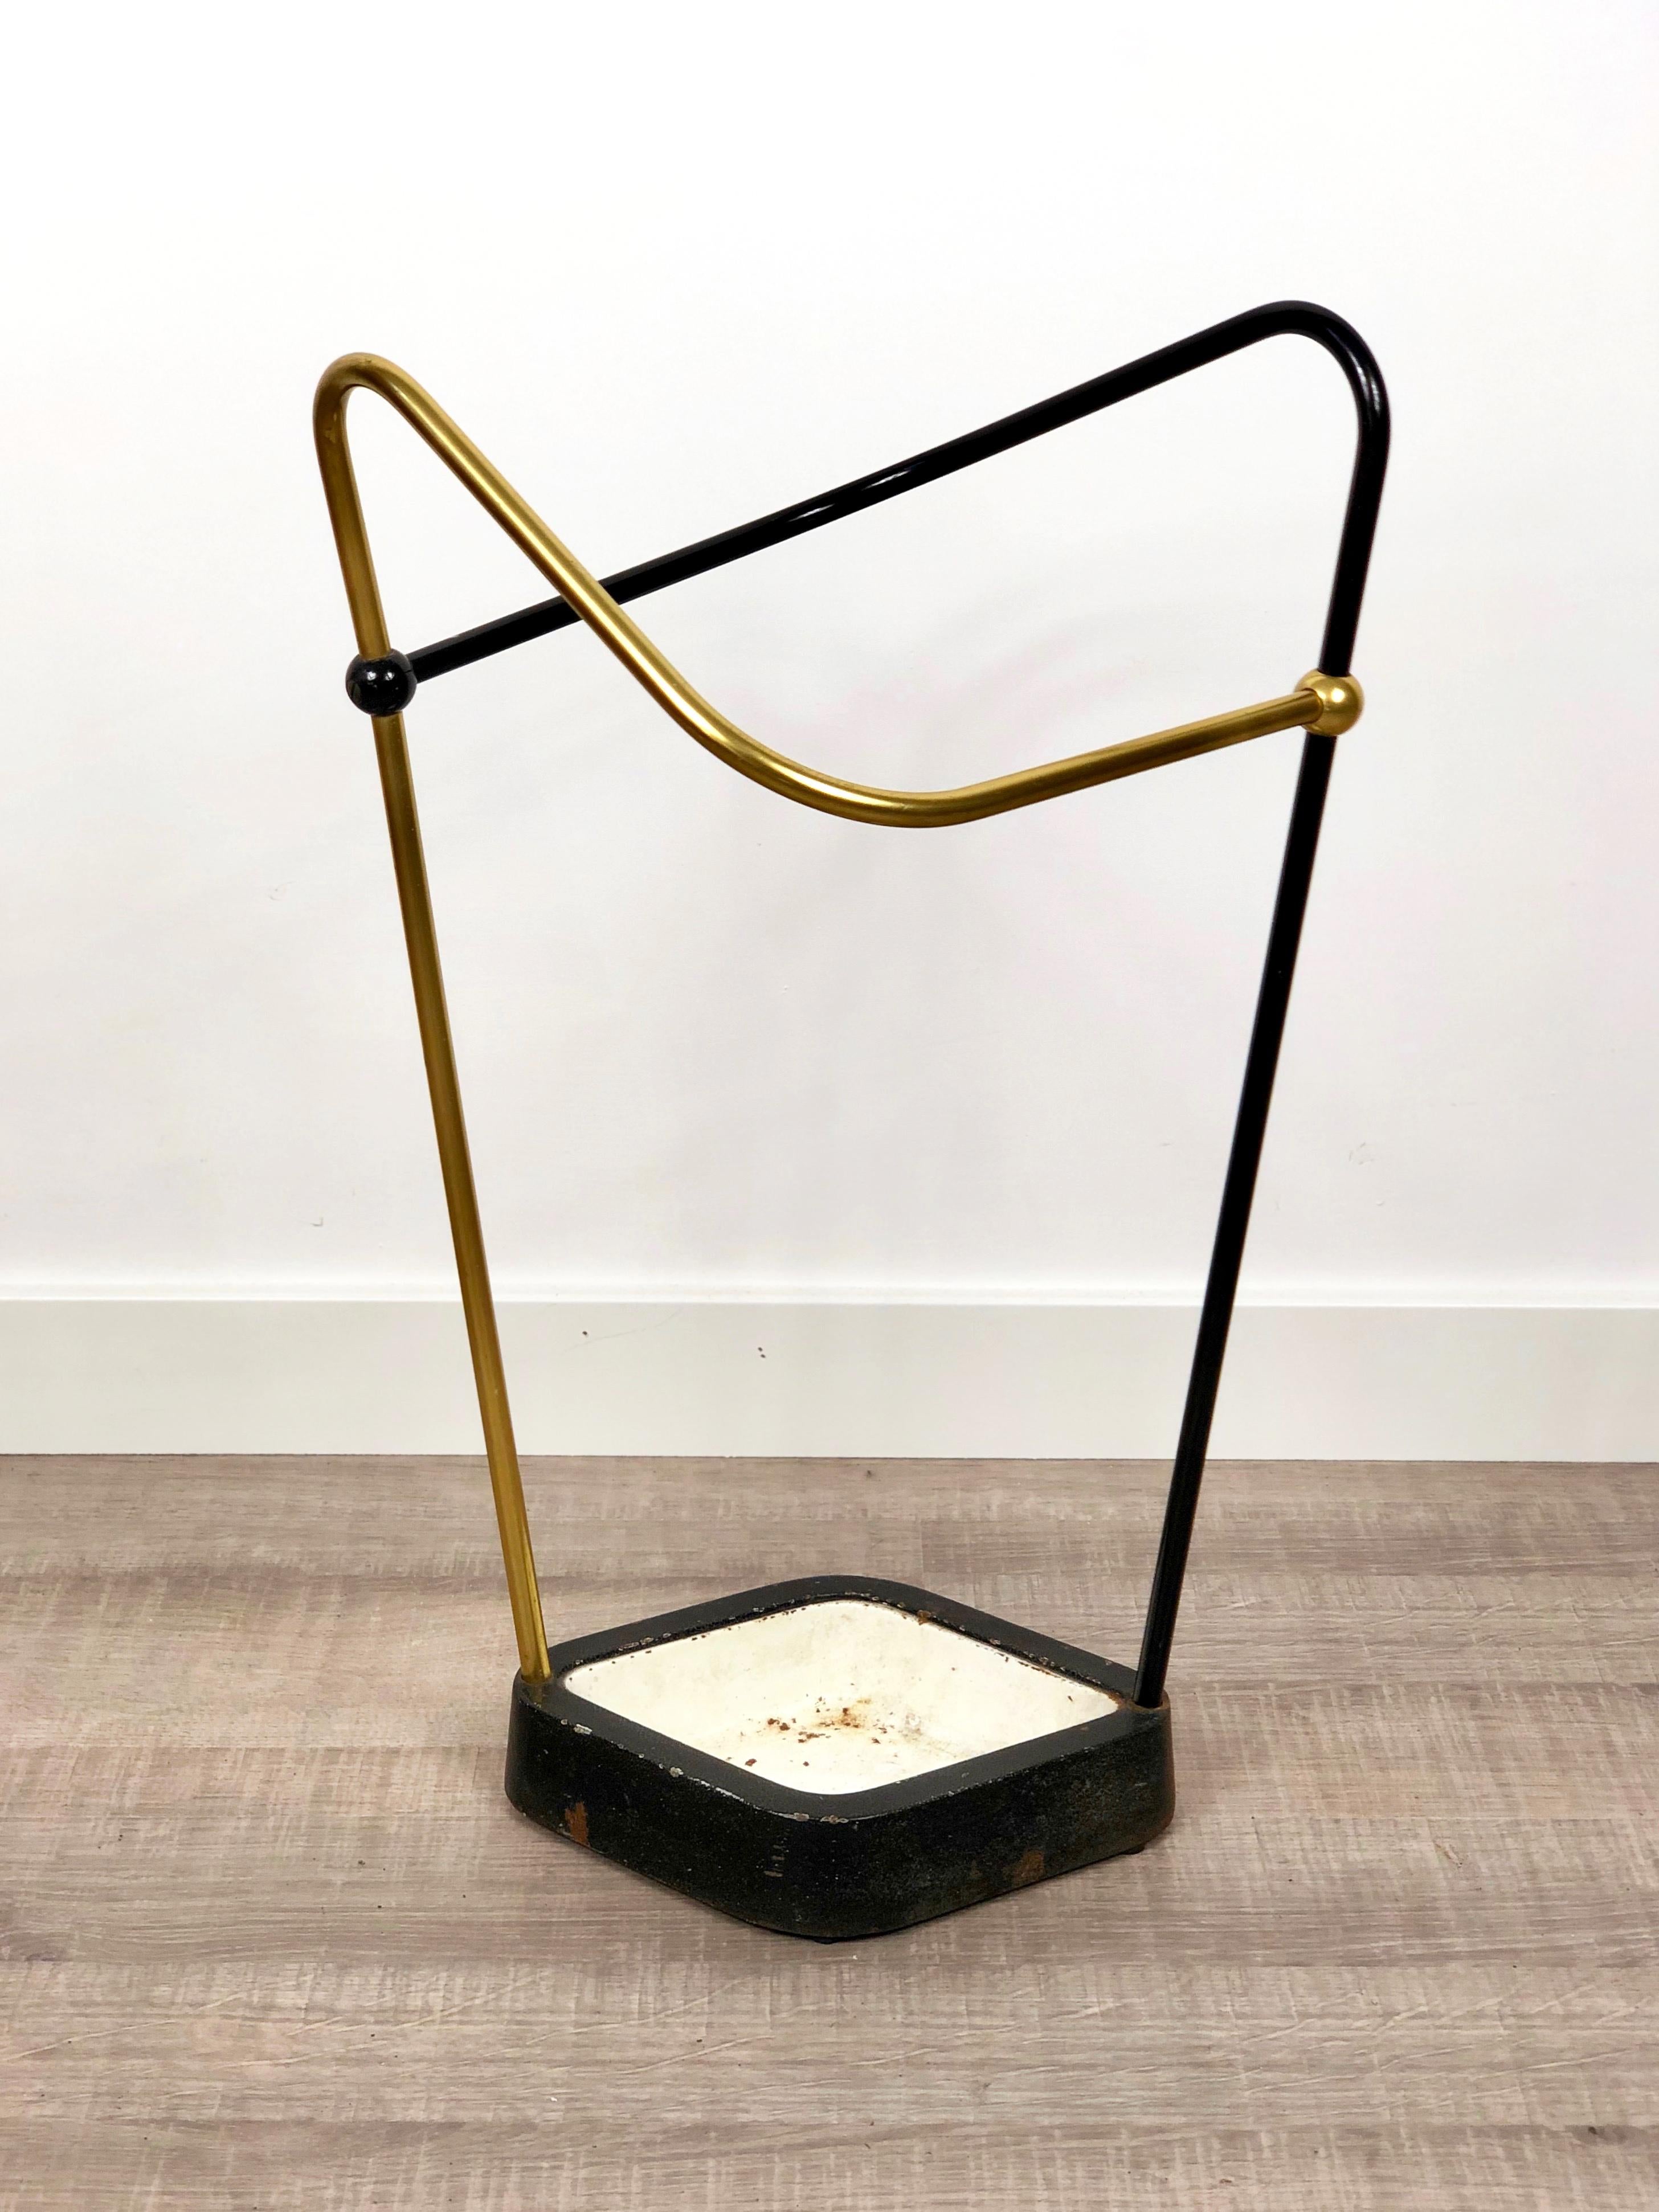 This original vintage Bauhaus style umbrella stand was produced in the 1950s in Germany. The brass colored top elements is made of aluminium, the heavy metal base element is made of cast iron. Straightforward and minimalistic design of the Bauhaus